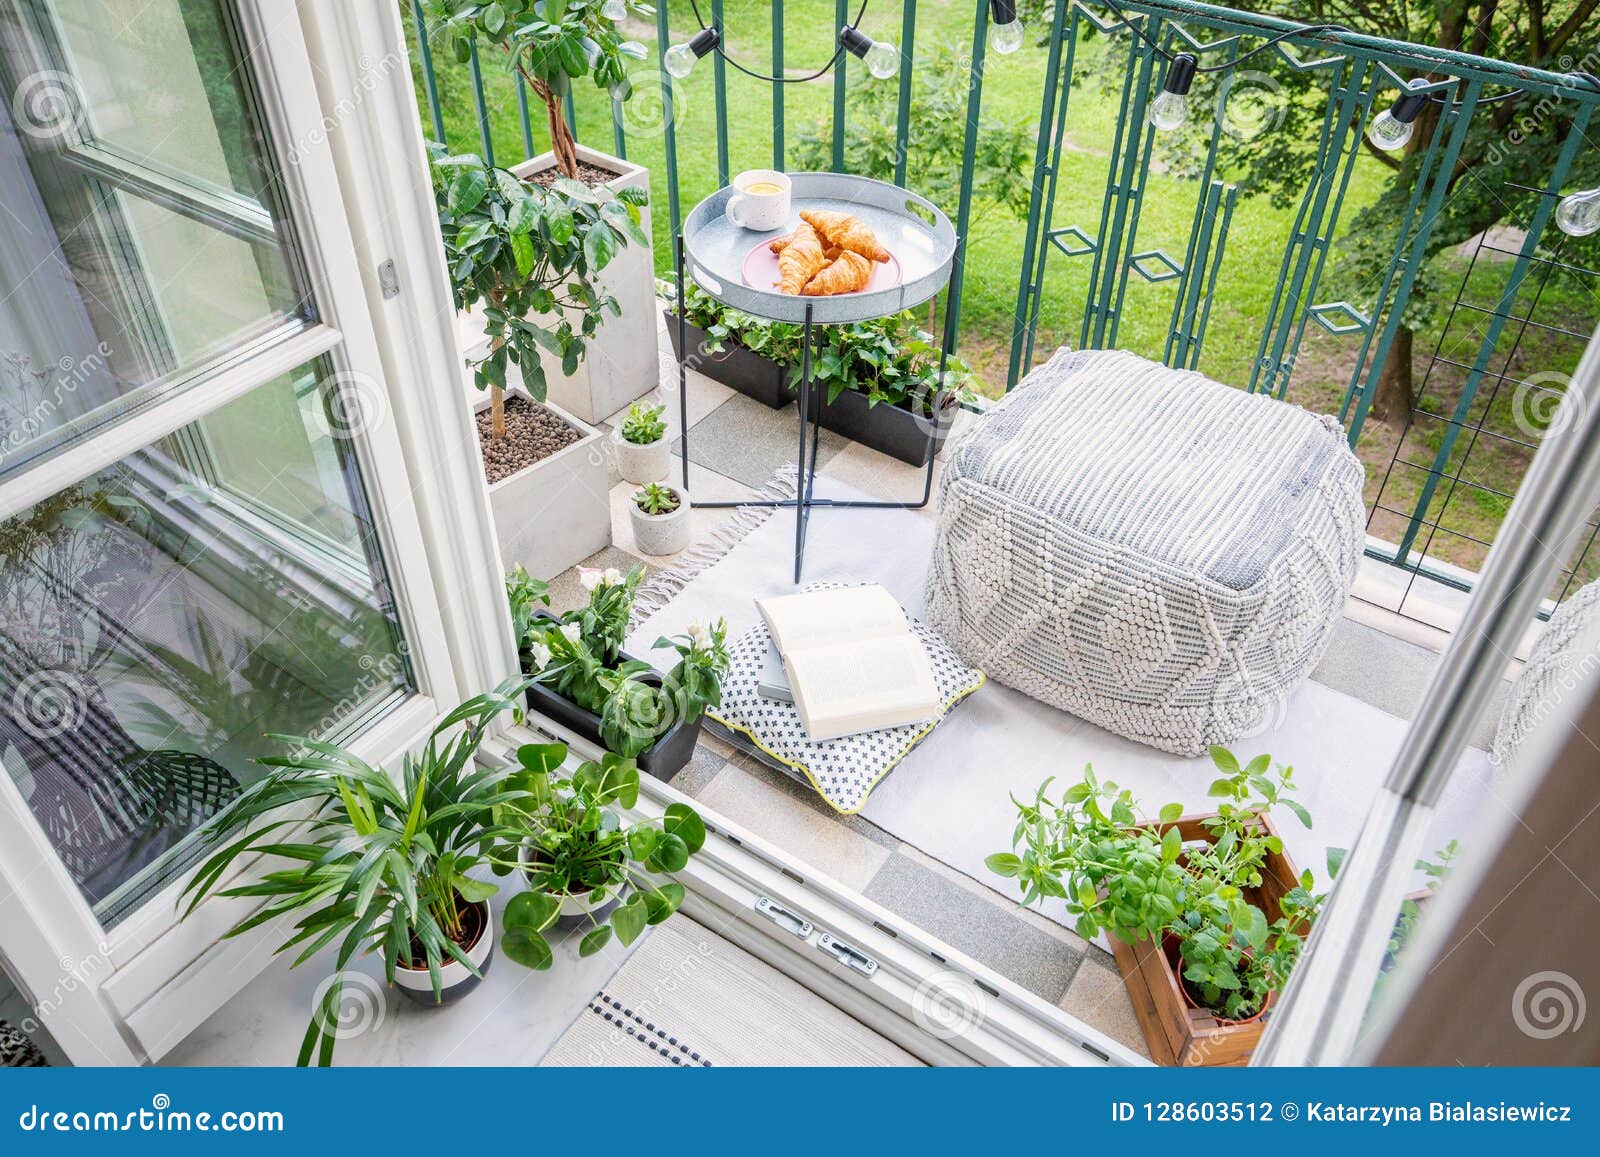 balcony with plants, pouf a table with breakfast